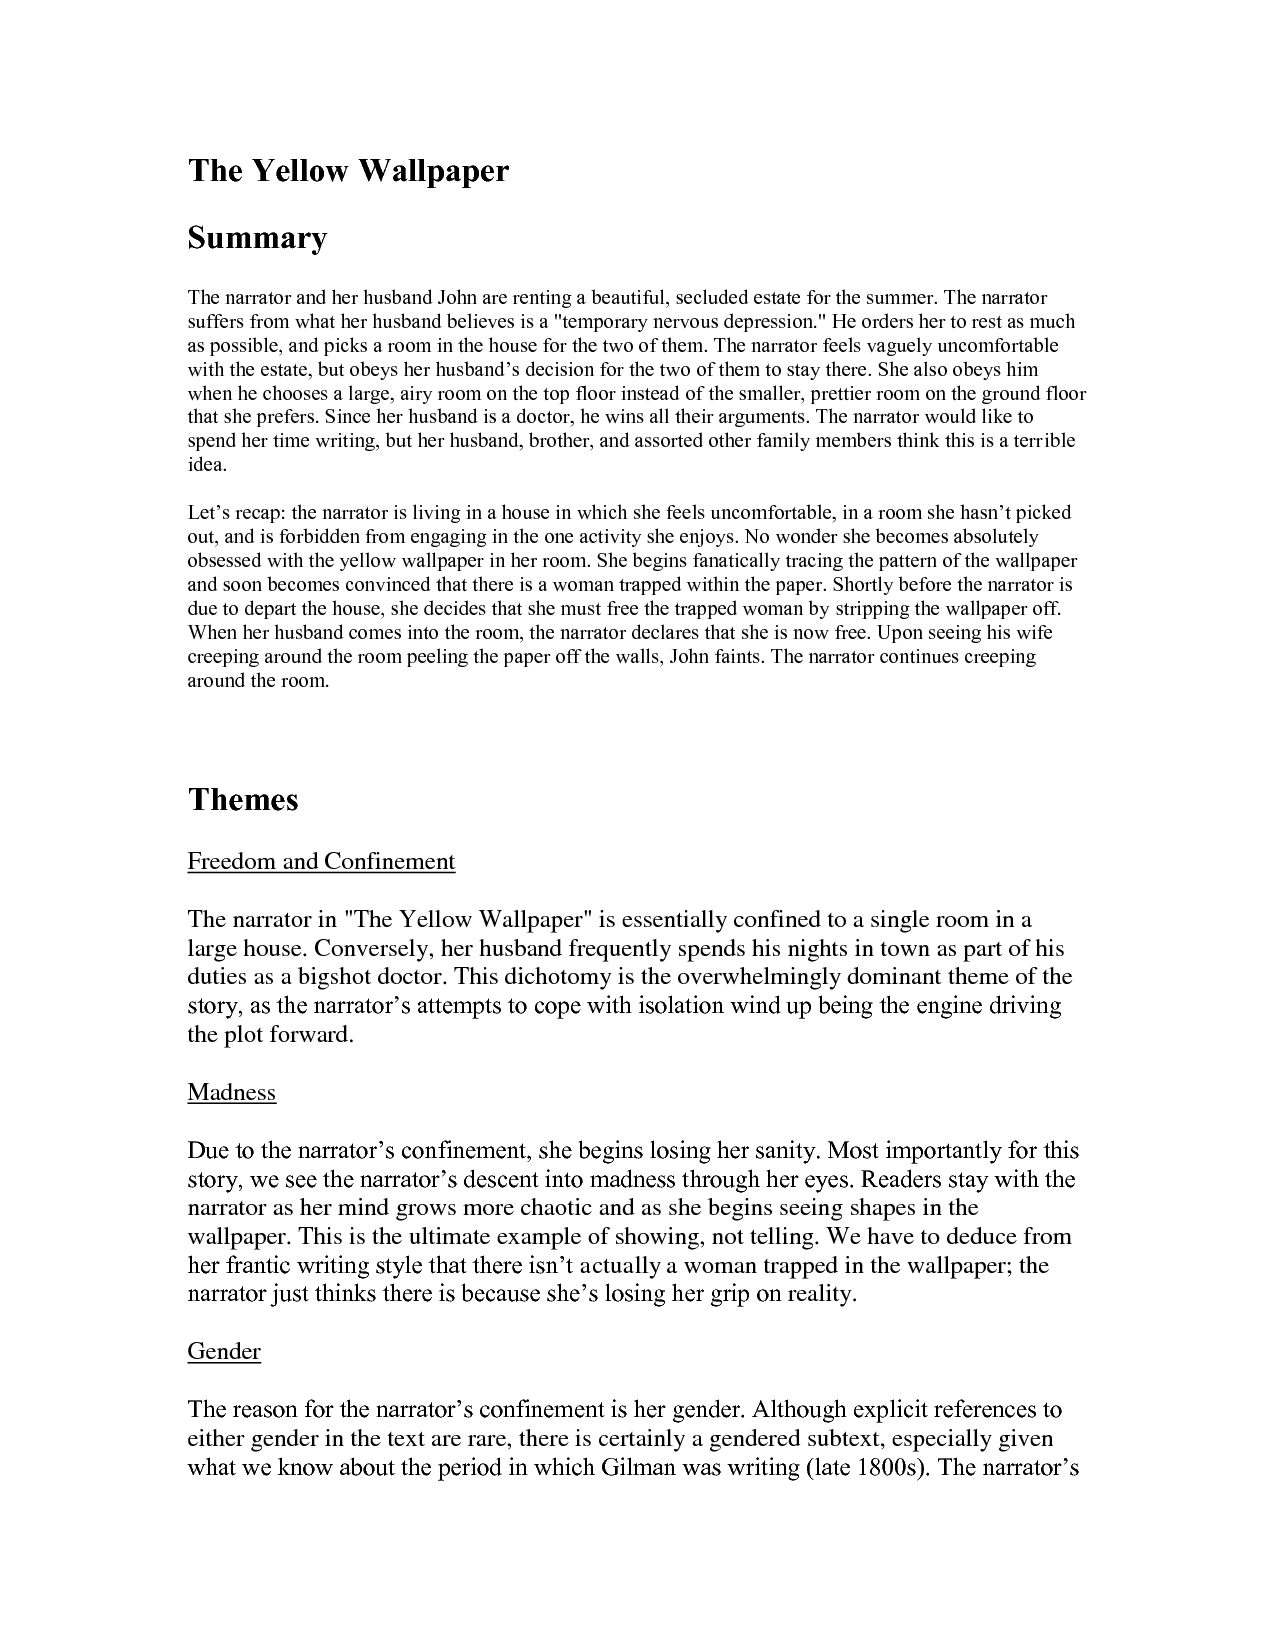 Essay on media and technology